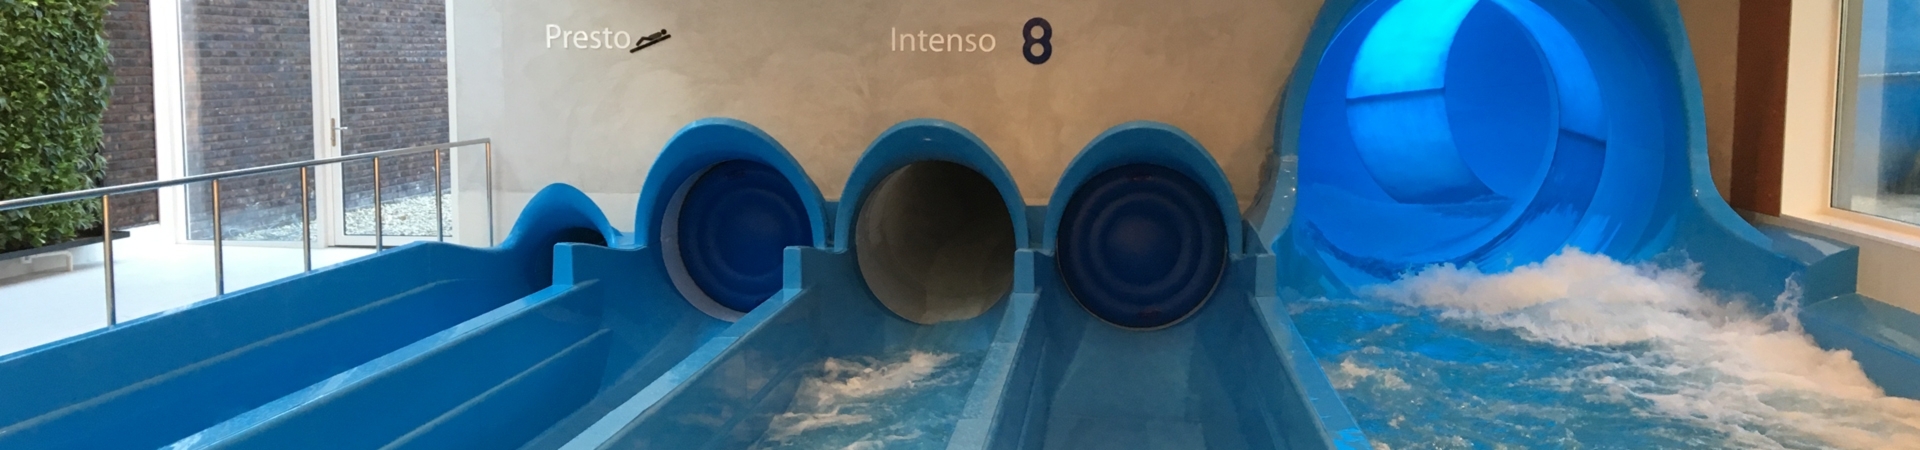 Inflatable shutters for slides